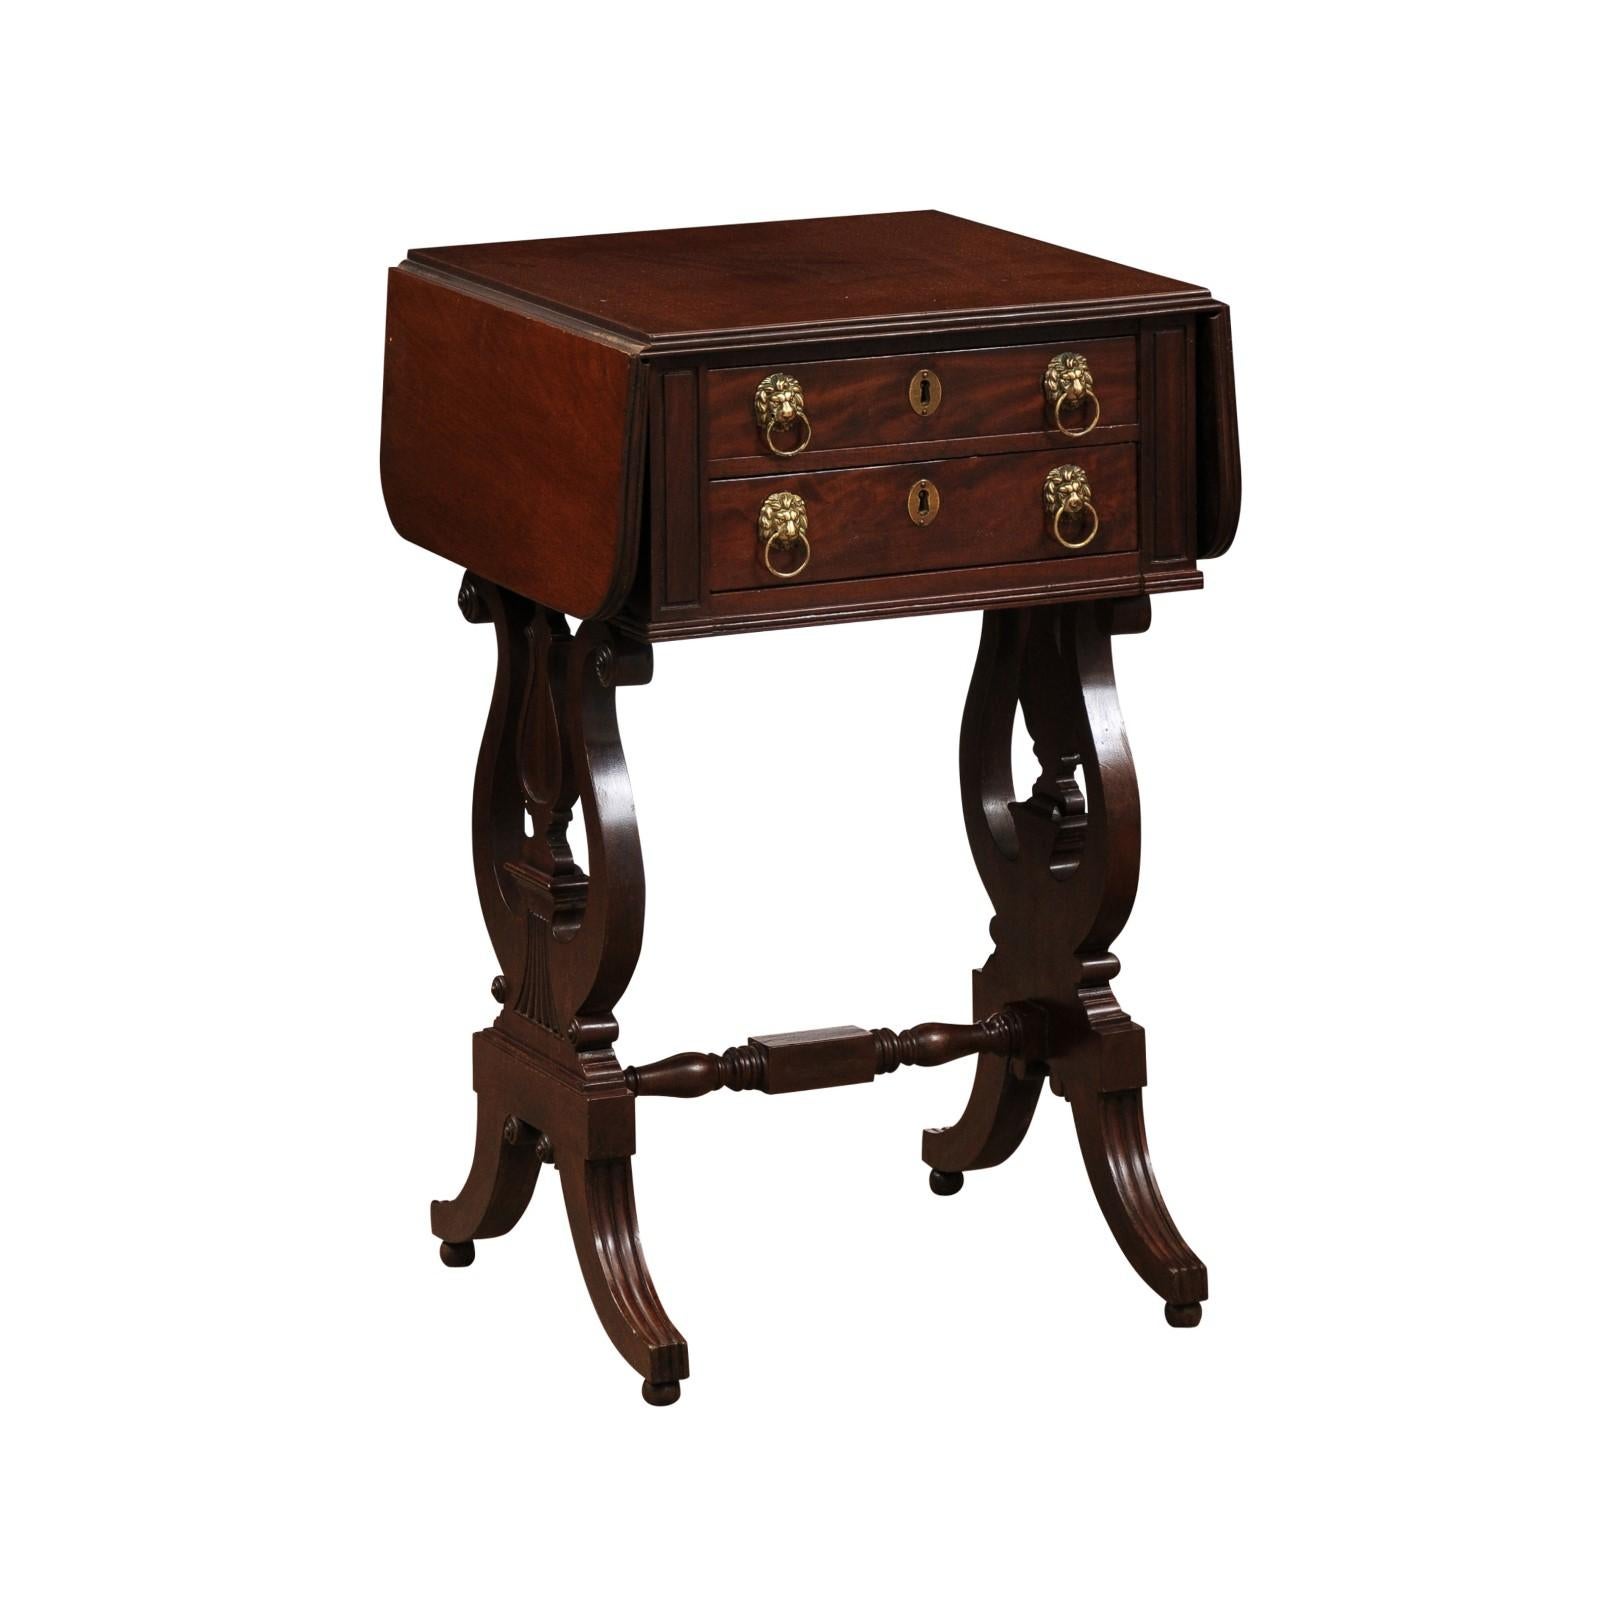 English Early 19th Century Regency Mahogany Drop Leaf Sewing Side Table with 2 Drawers, Lyre Splayed Legs & Stretcher